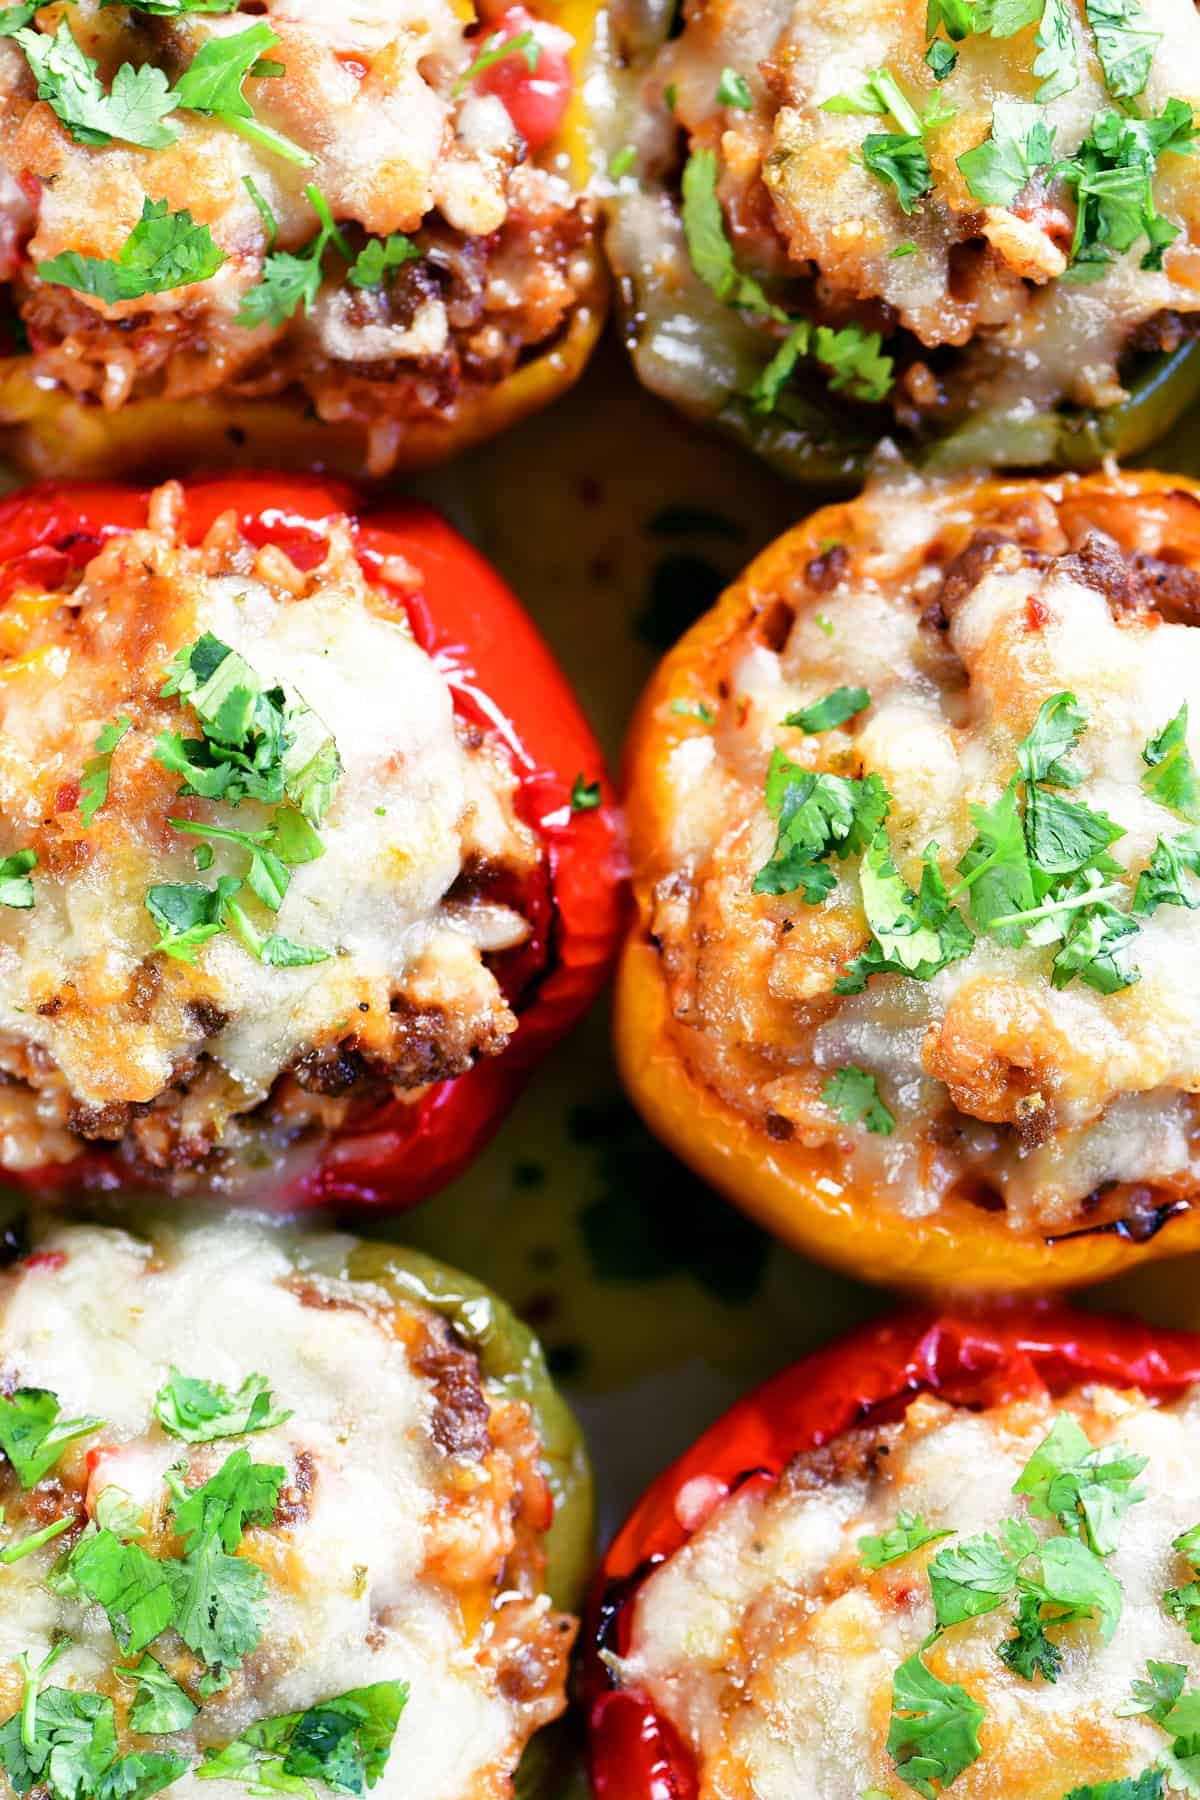 stuffed peppers topped with fresh cilantro.